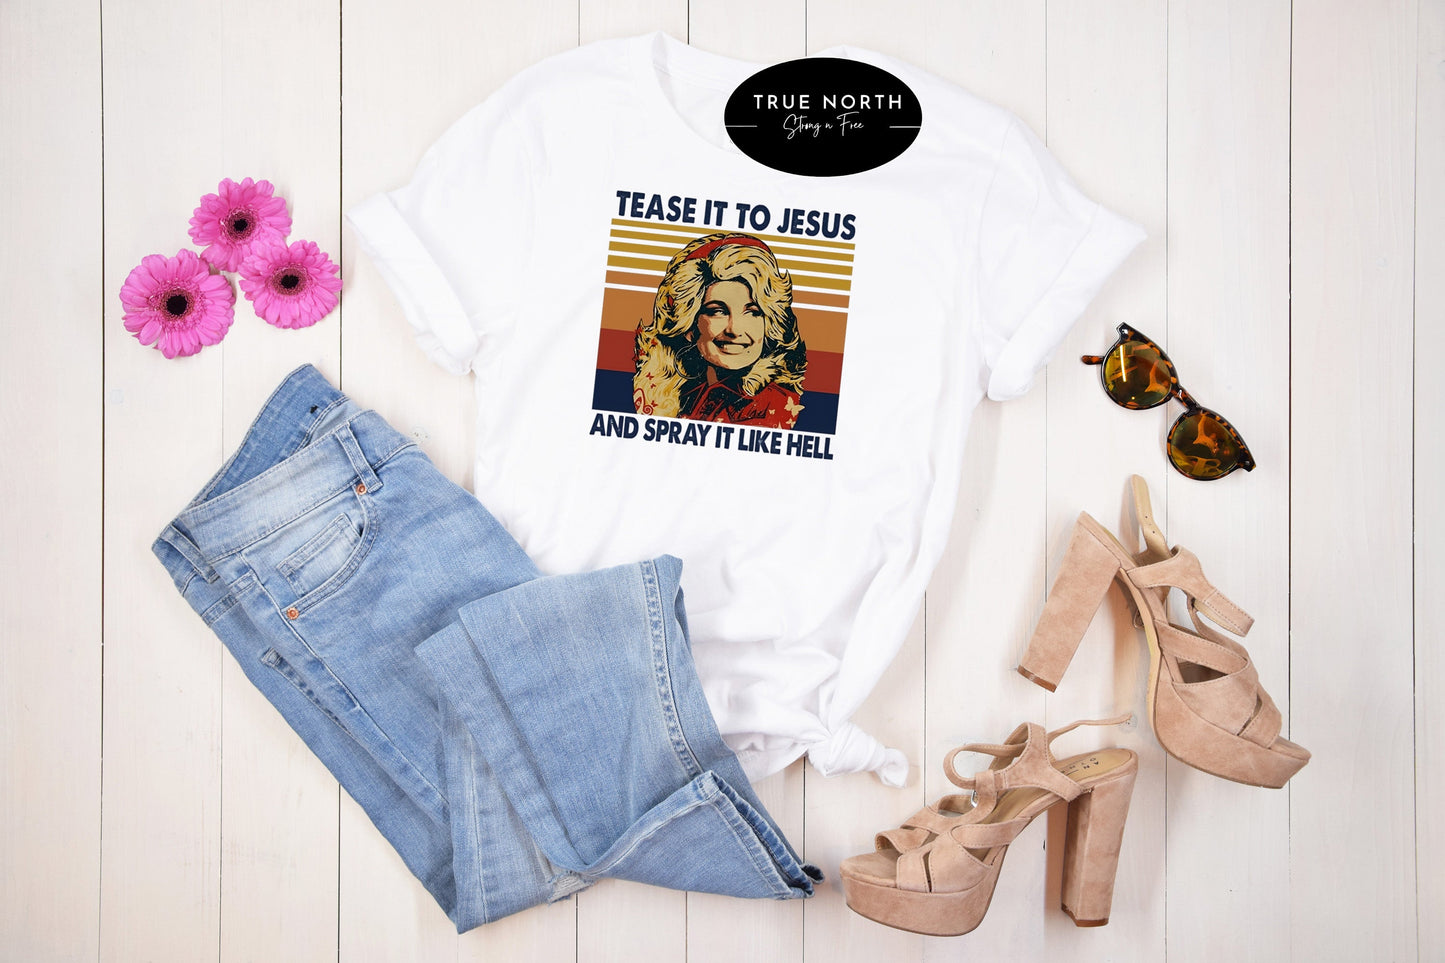 Country Tease It to Jesus T-Shirt or Sweatshirt - Fun and Stylish Clothing for Your Faith-Filled Life